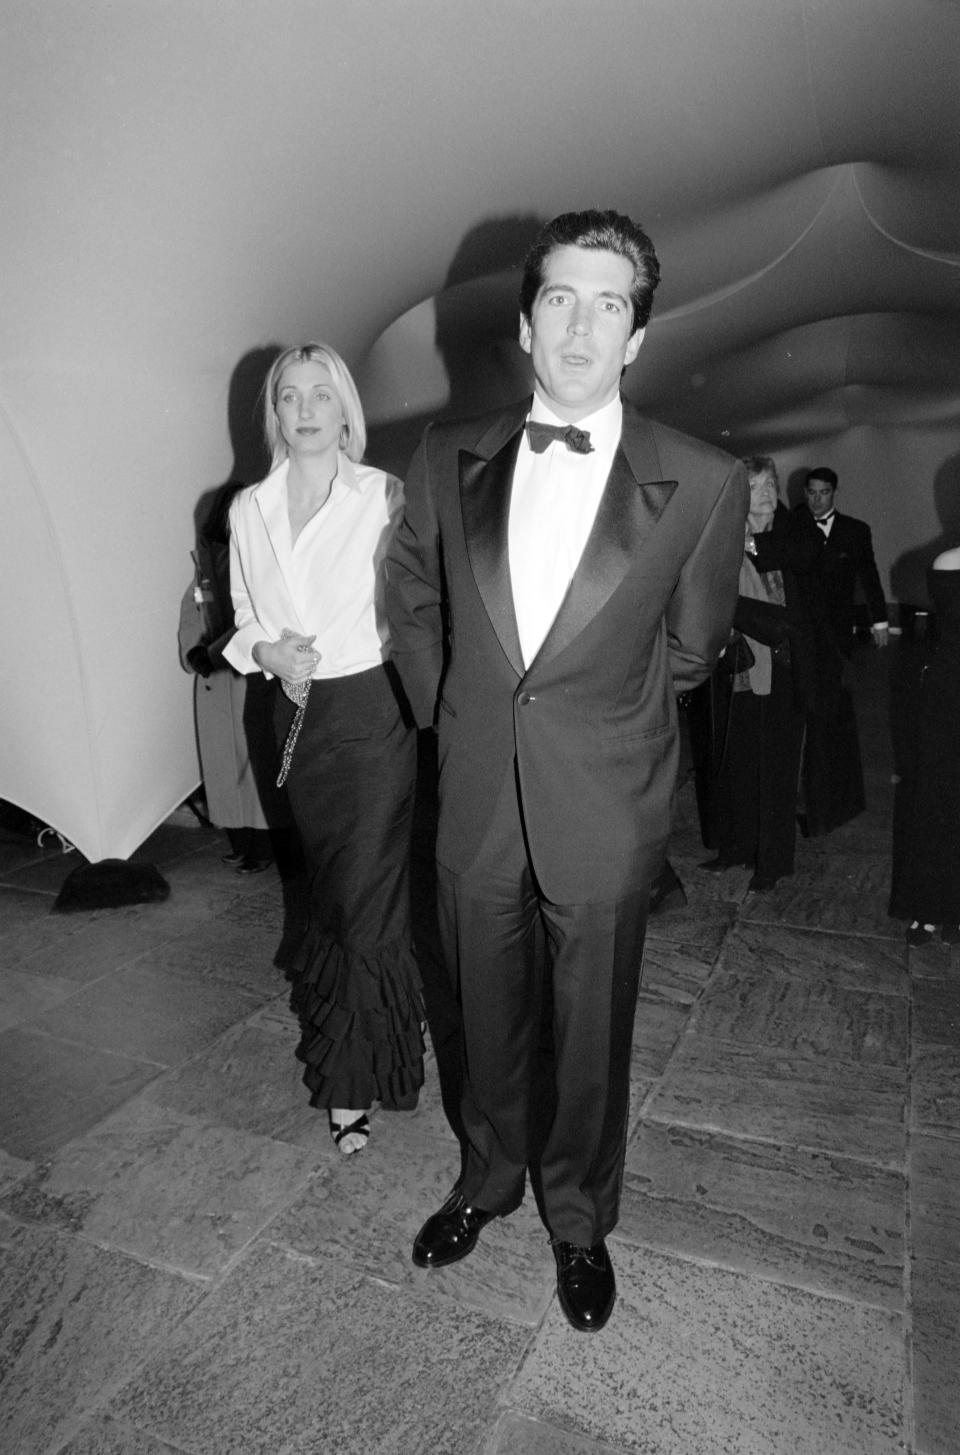 Carolyn Bessette-Kennedy, John F. Kennedy, Jr and guest attend a party at the Whitney Museum to celebrate the Exhibition "The American Century: Art & Culture 1900-2000." on March 11, 1999 in New York. (Photo by Steve Eichner/Penske Media via Getty Images)